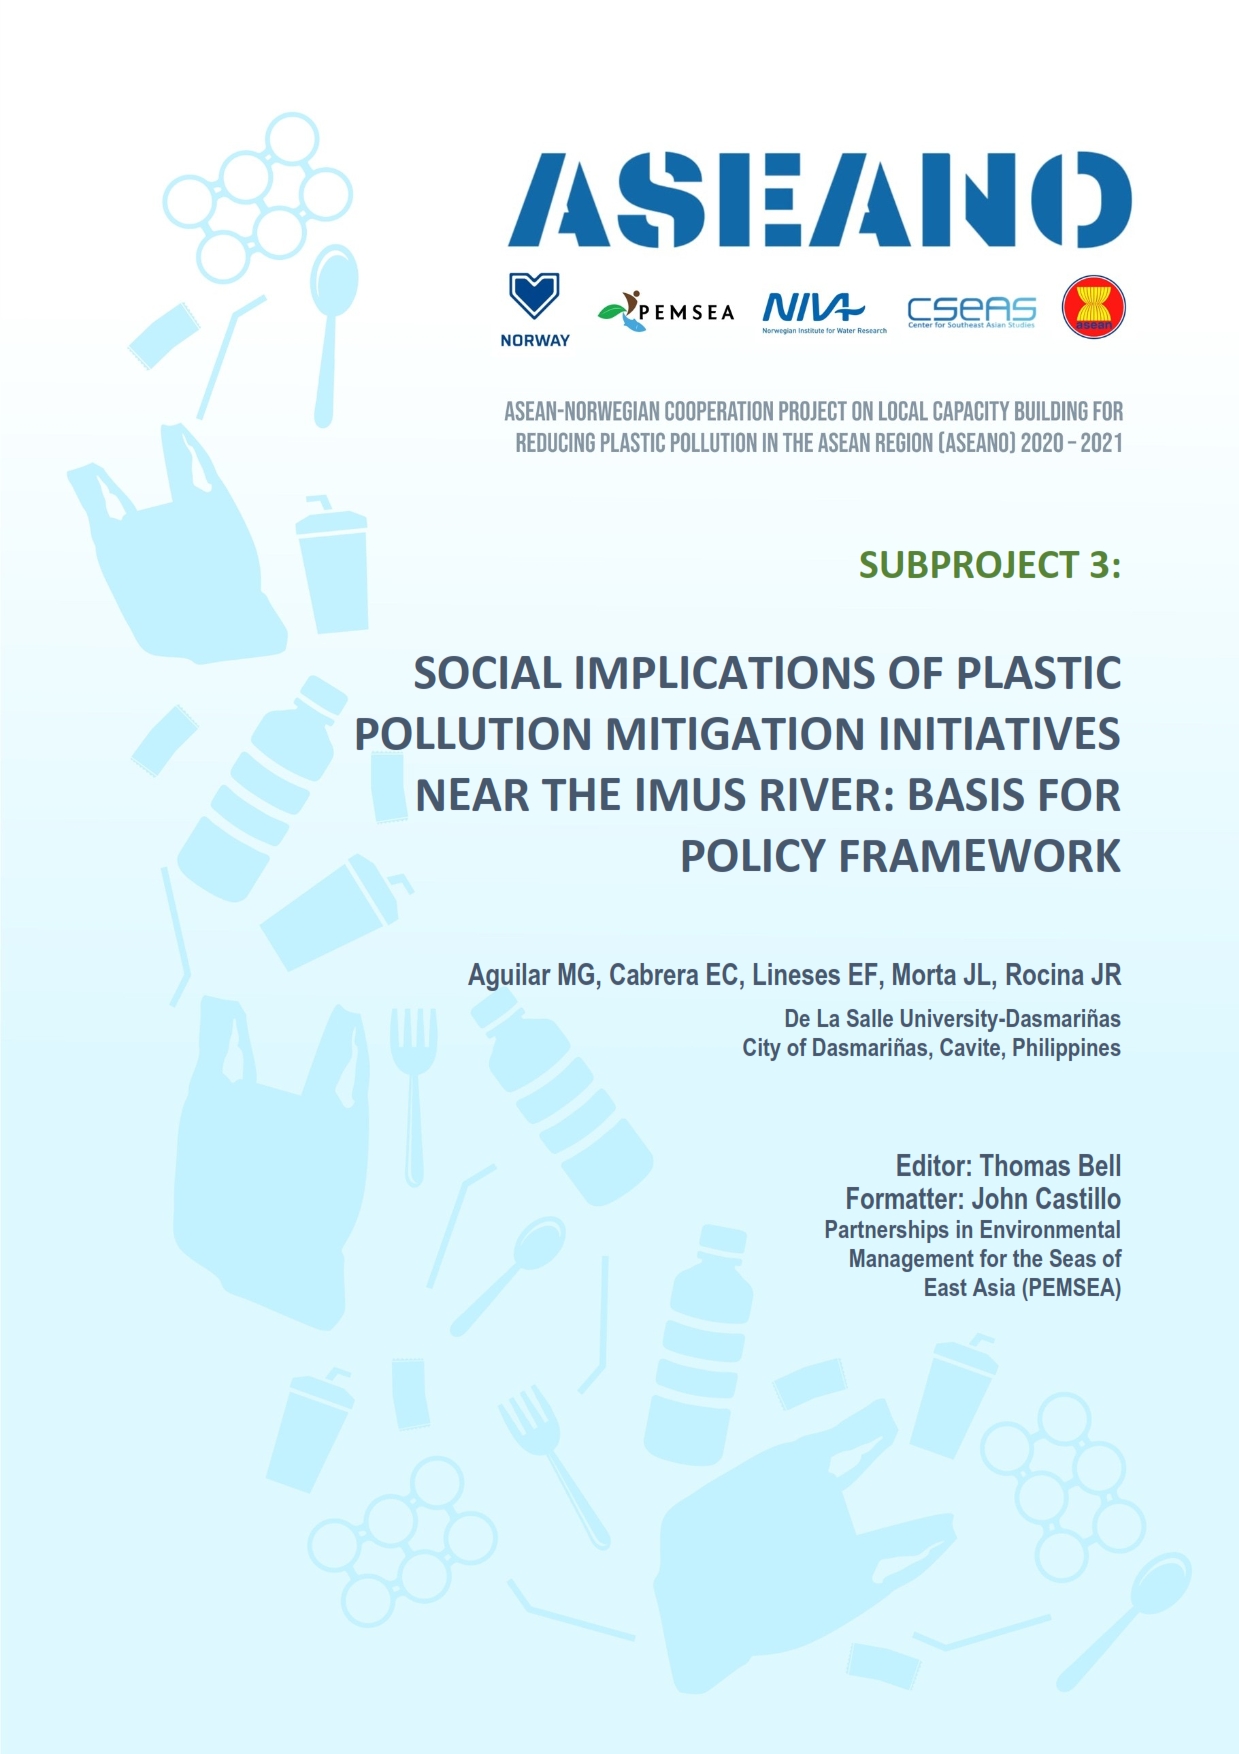 ASEANO Project Report: Social Implications of Plastic Pollution Mitigation Initiatives Along the Imus River